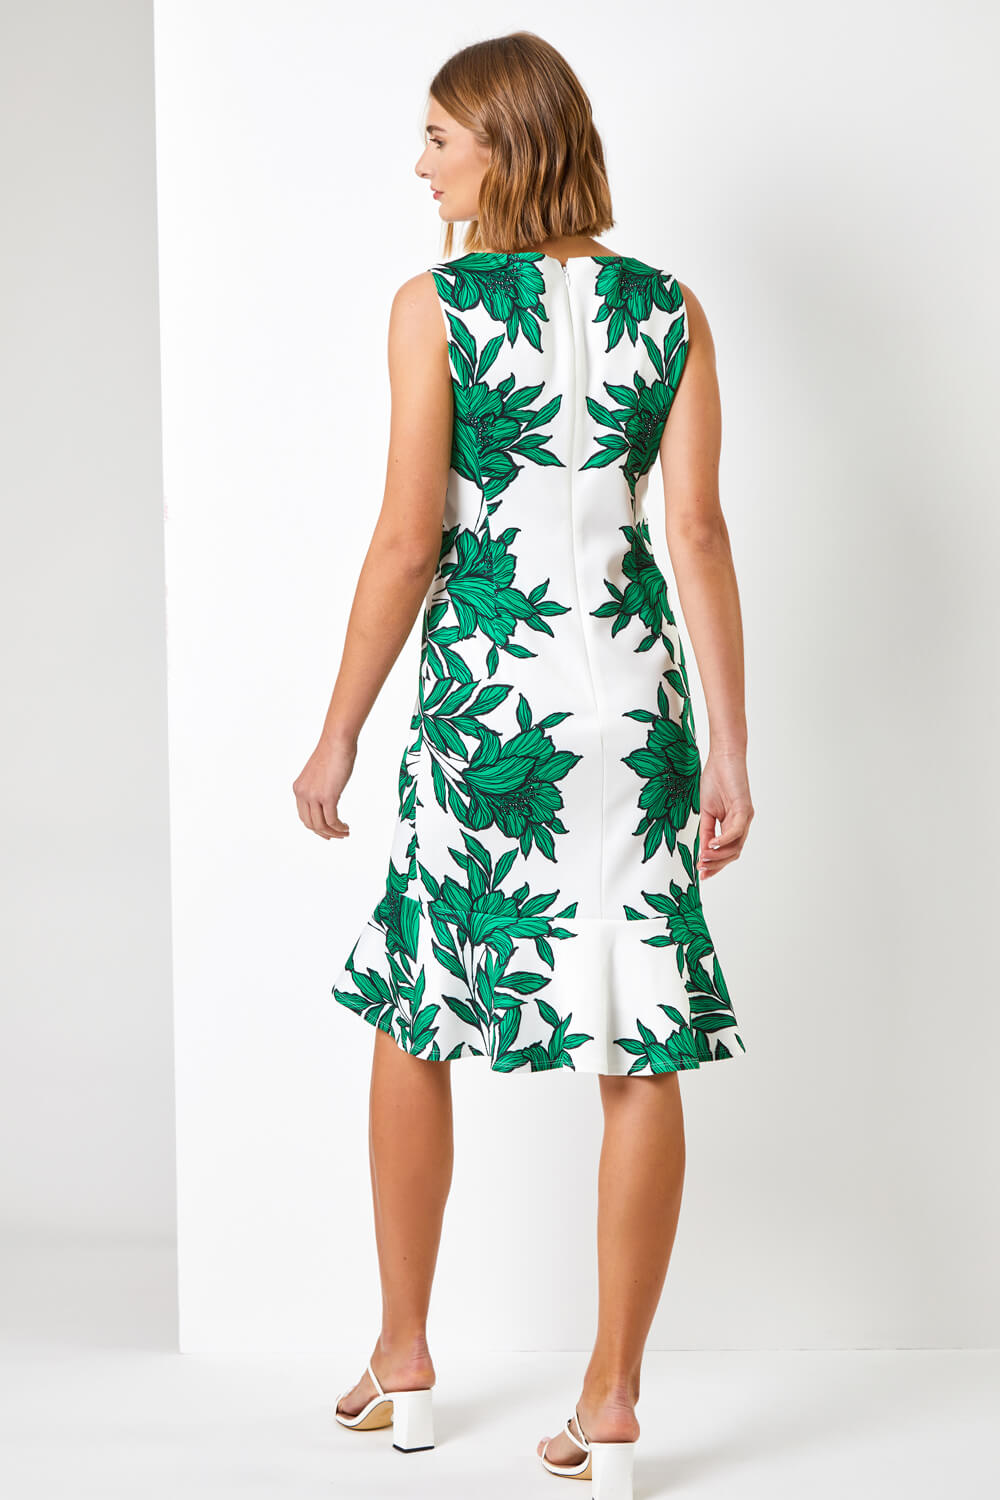 Green Floral Border Print Frill Stretch Dress, Image 2 of 4